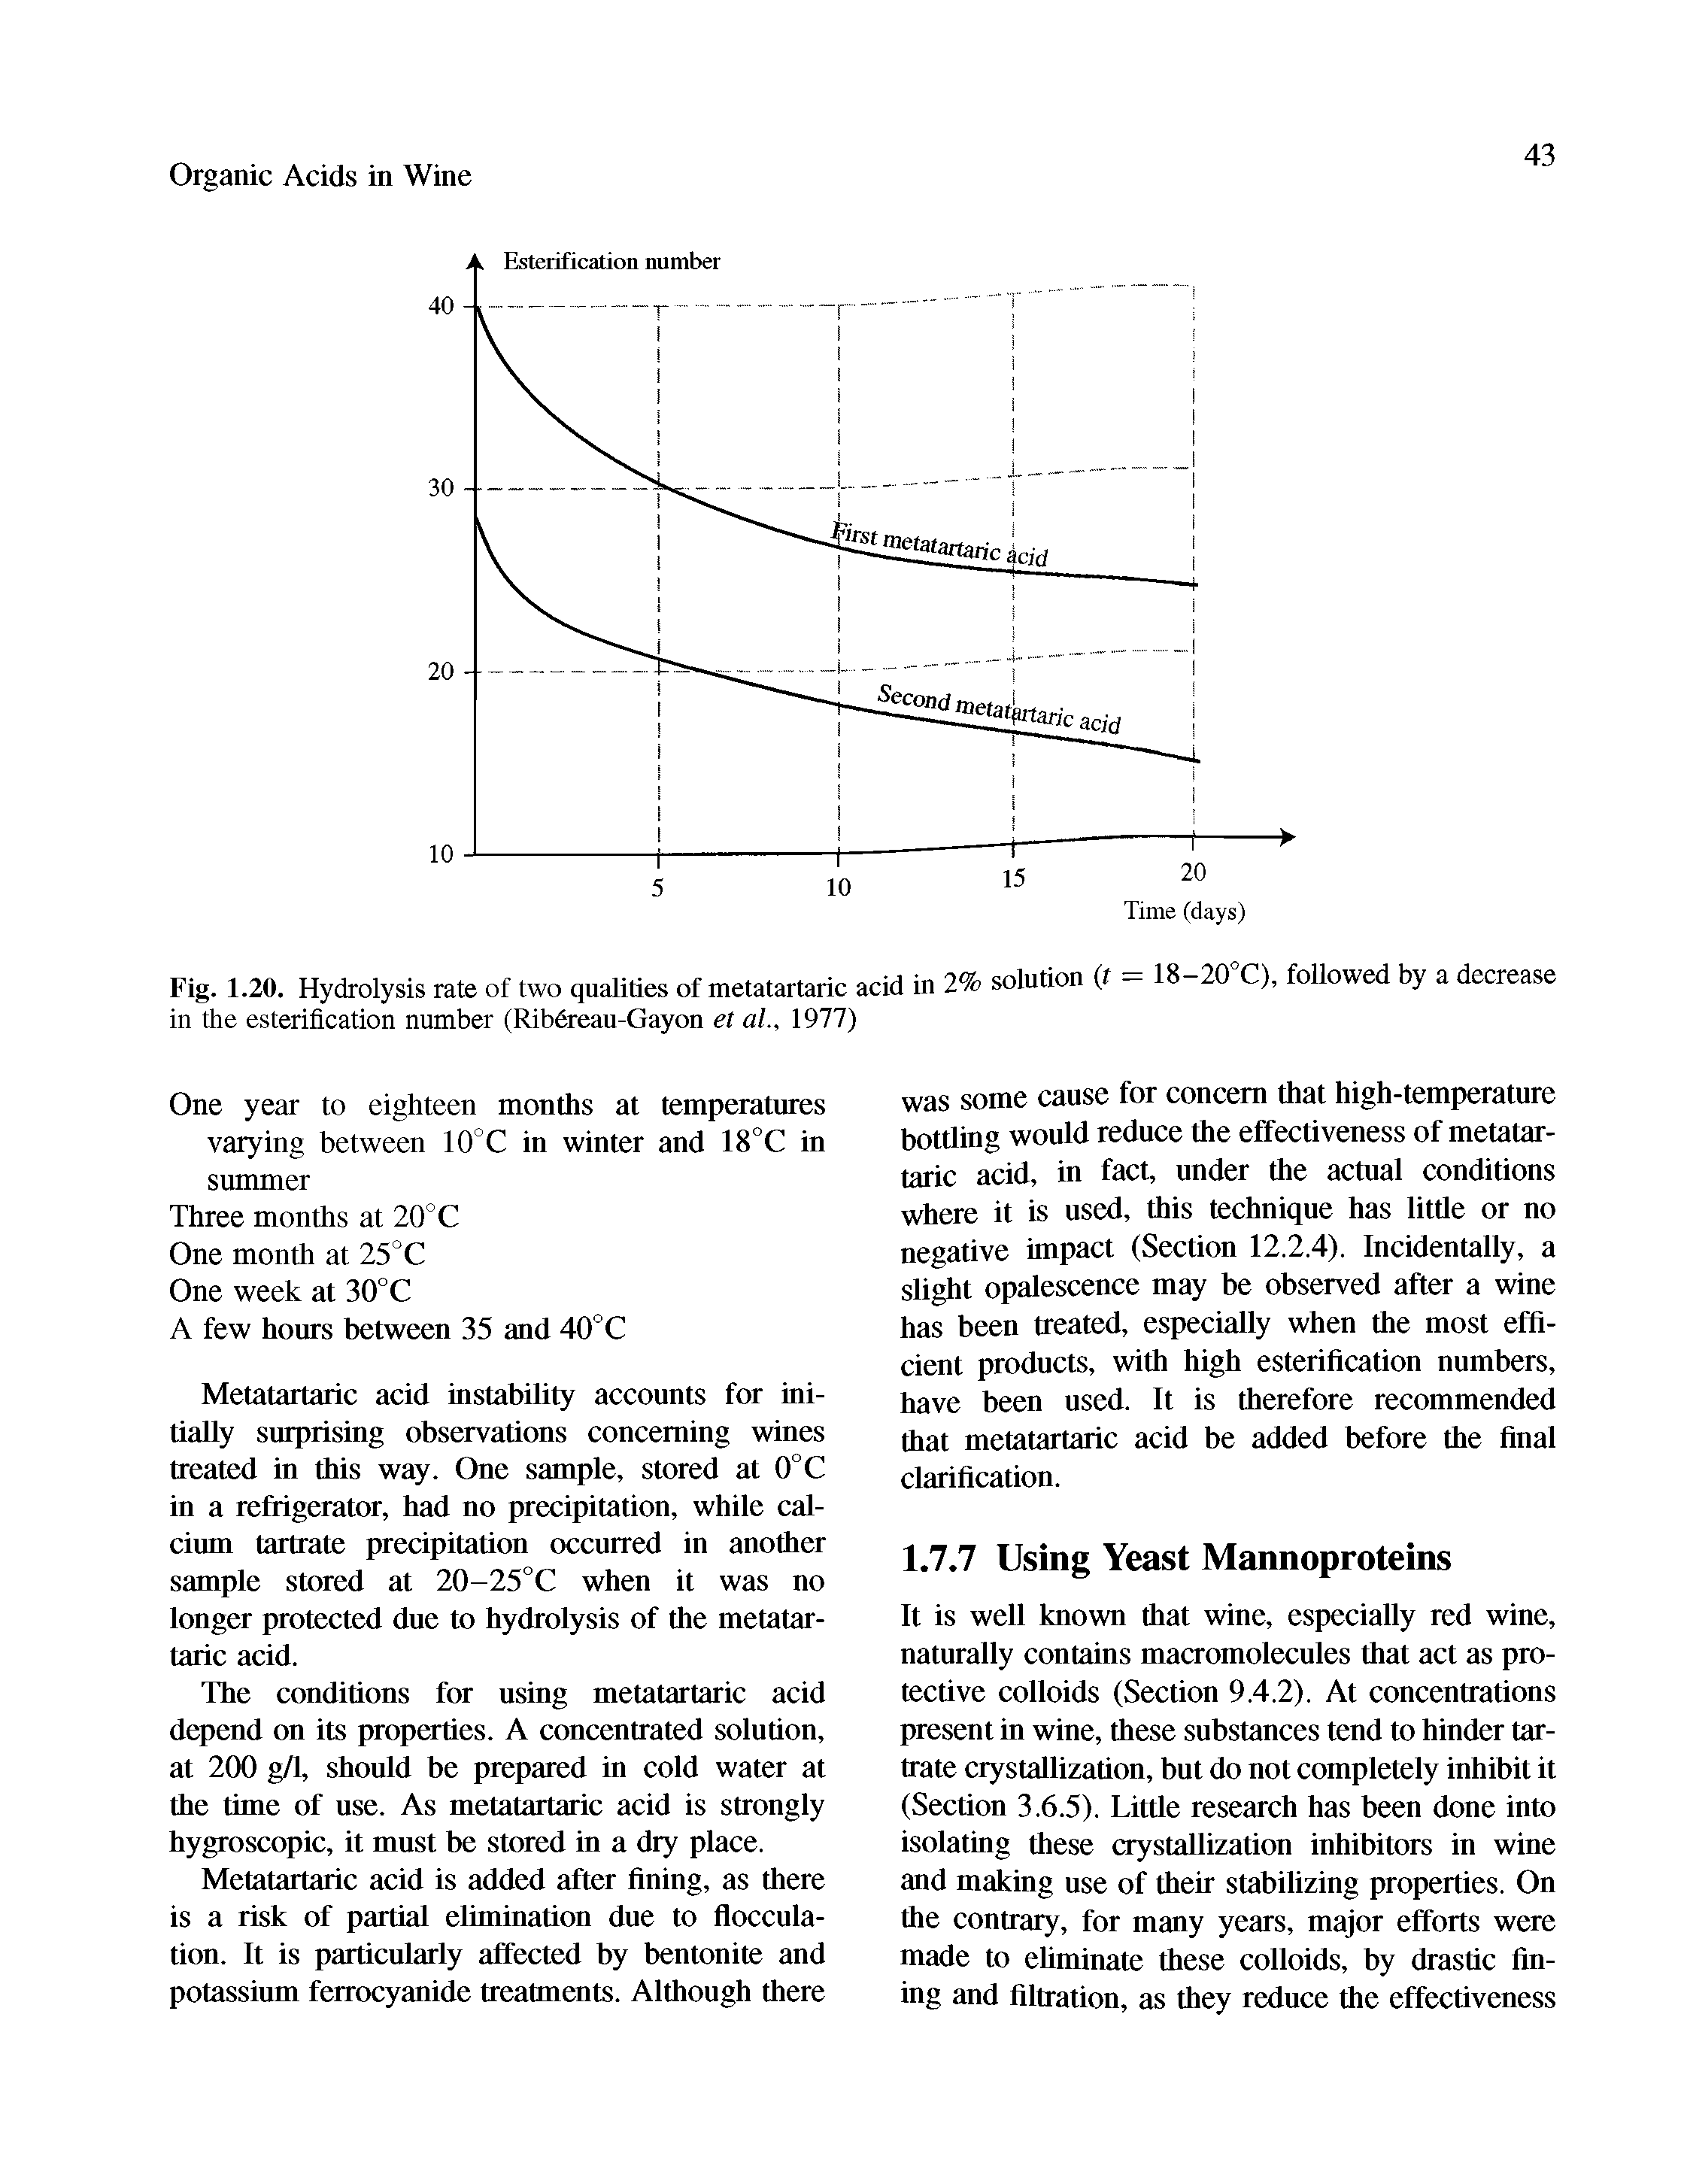 Fig. 1.20. Hydrolysis rate of two qualities of metatartaric acid in 2% solution (f in the esterification number (Ribdreau-Gayon et al., 1977)...